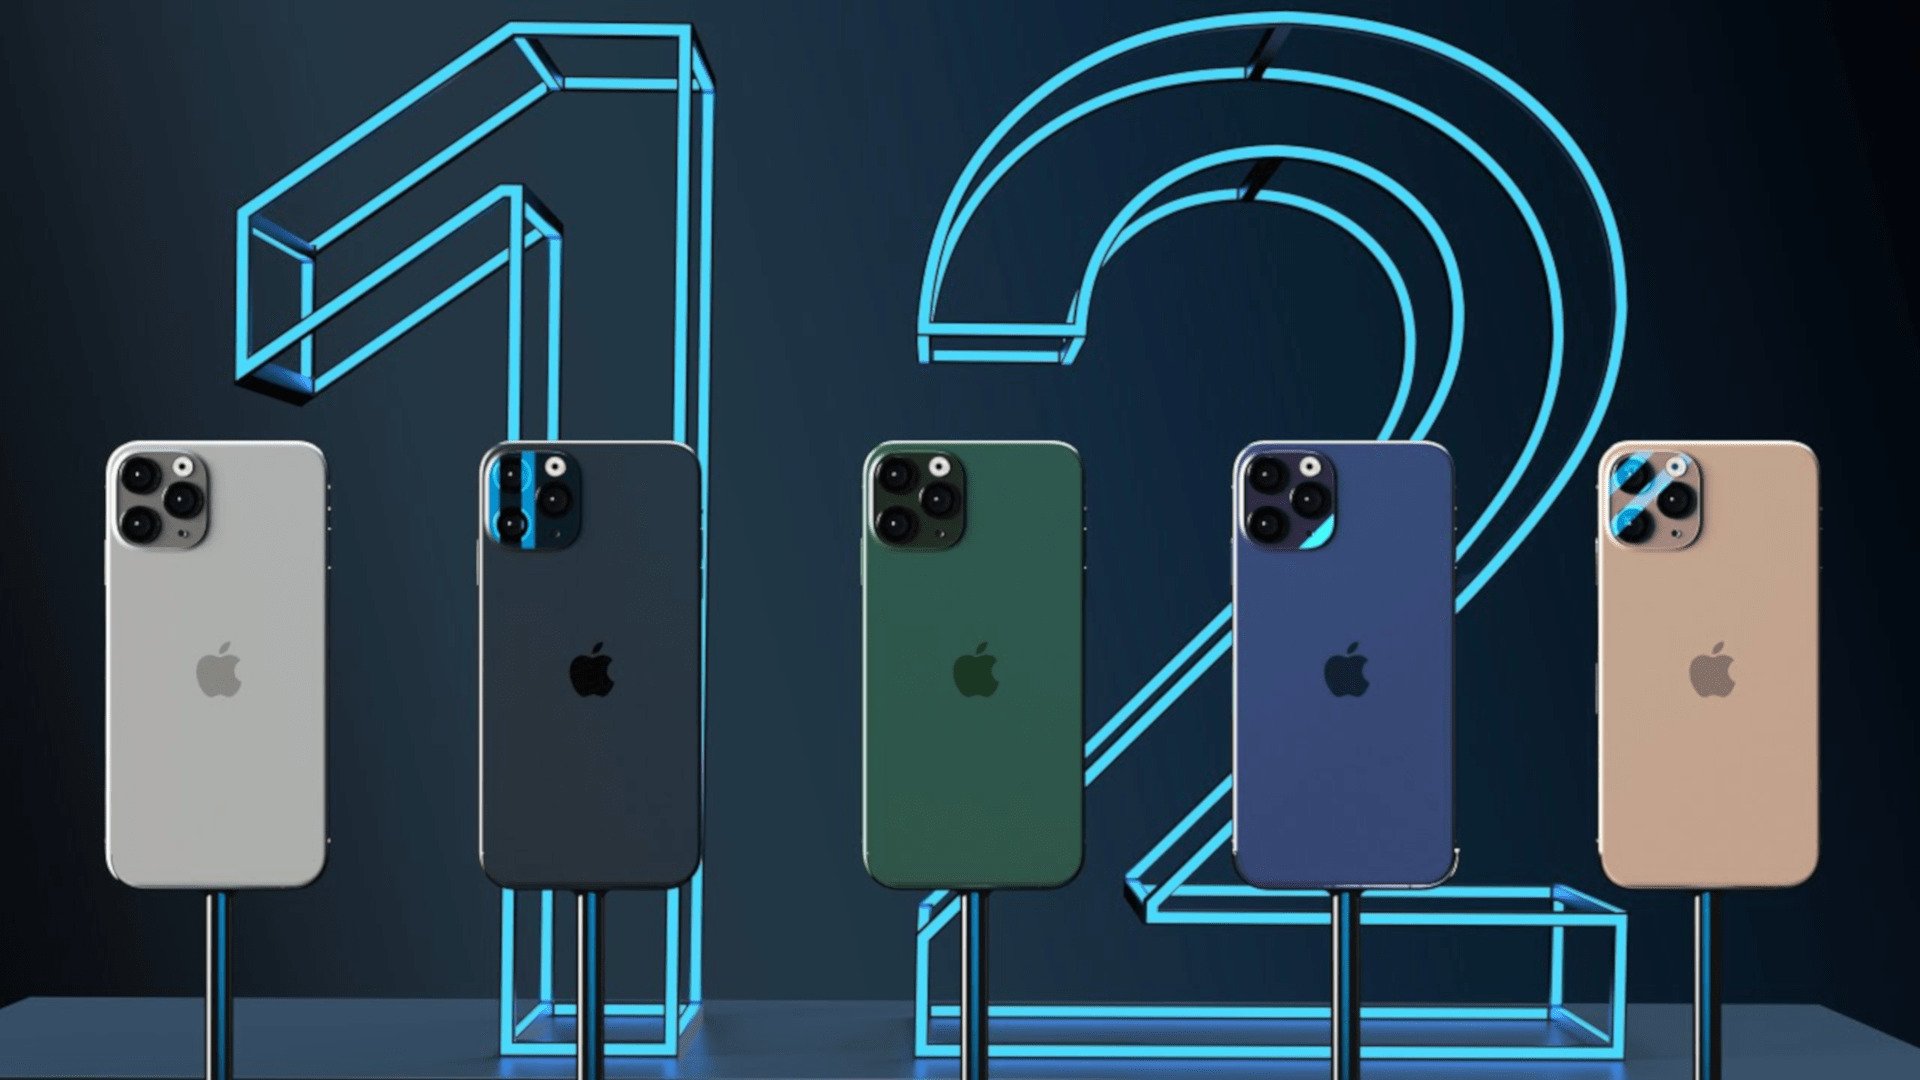 Apple iPhone 12 Concepts